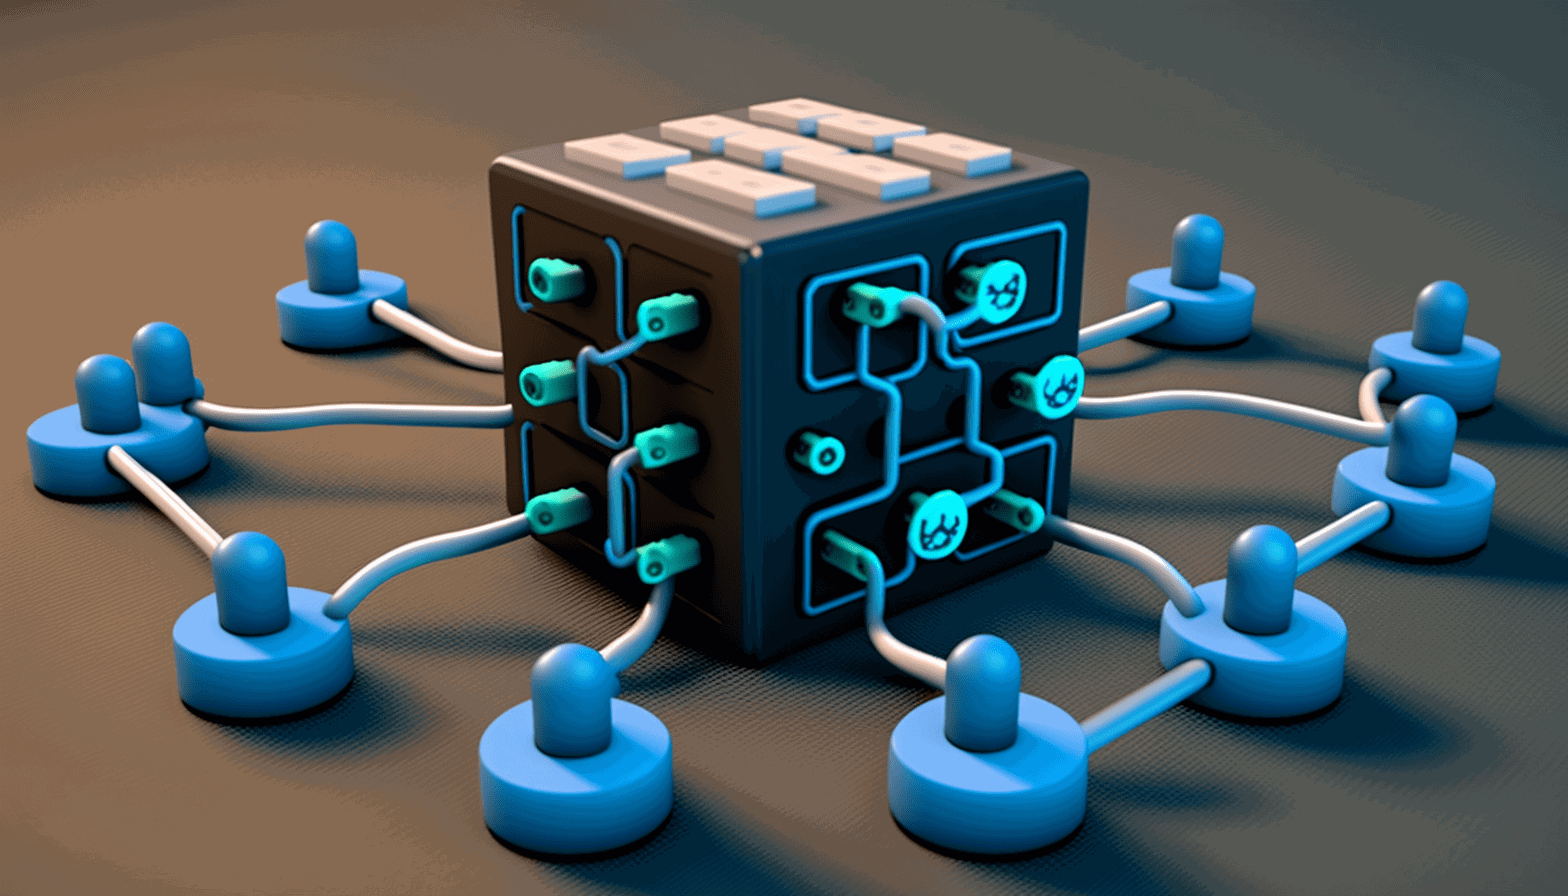 A cartoon or 3d animated image of a computer with a chain symbolizing the blockchain, connected to multiple other computer symbols representing the peers in the network, all connected to a central hub symbolizing the centralized cache setup.